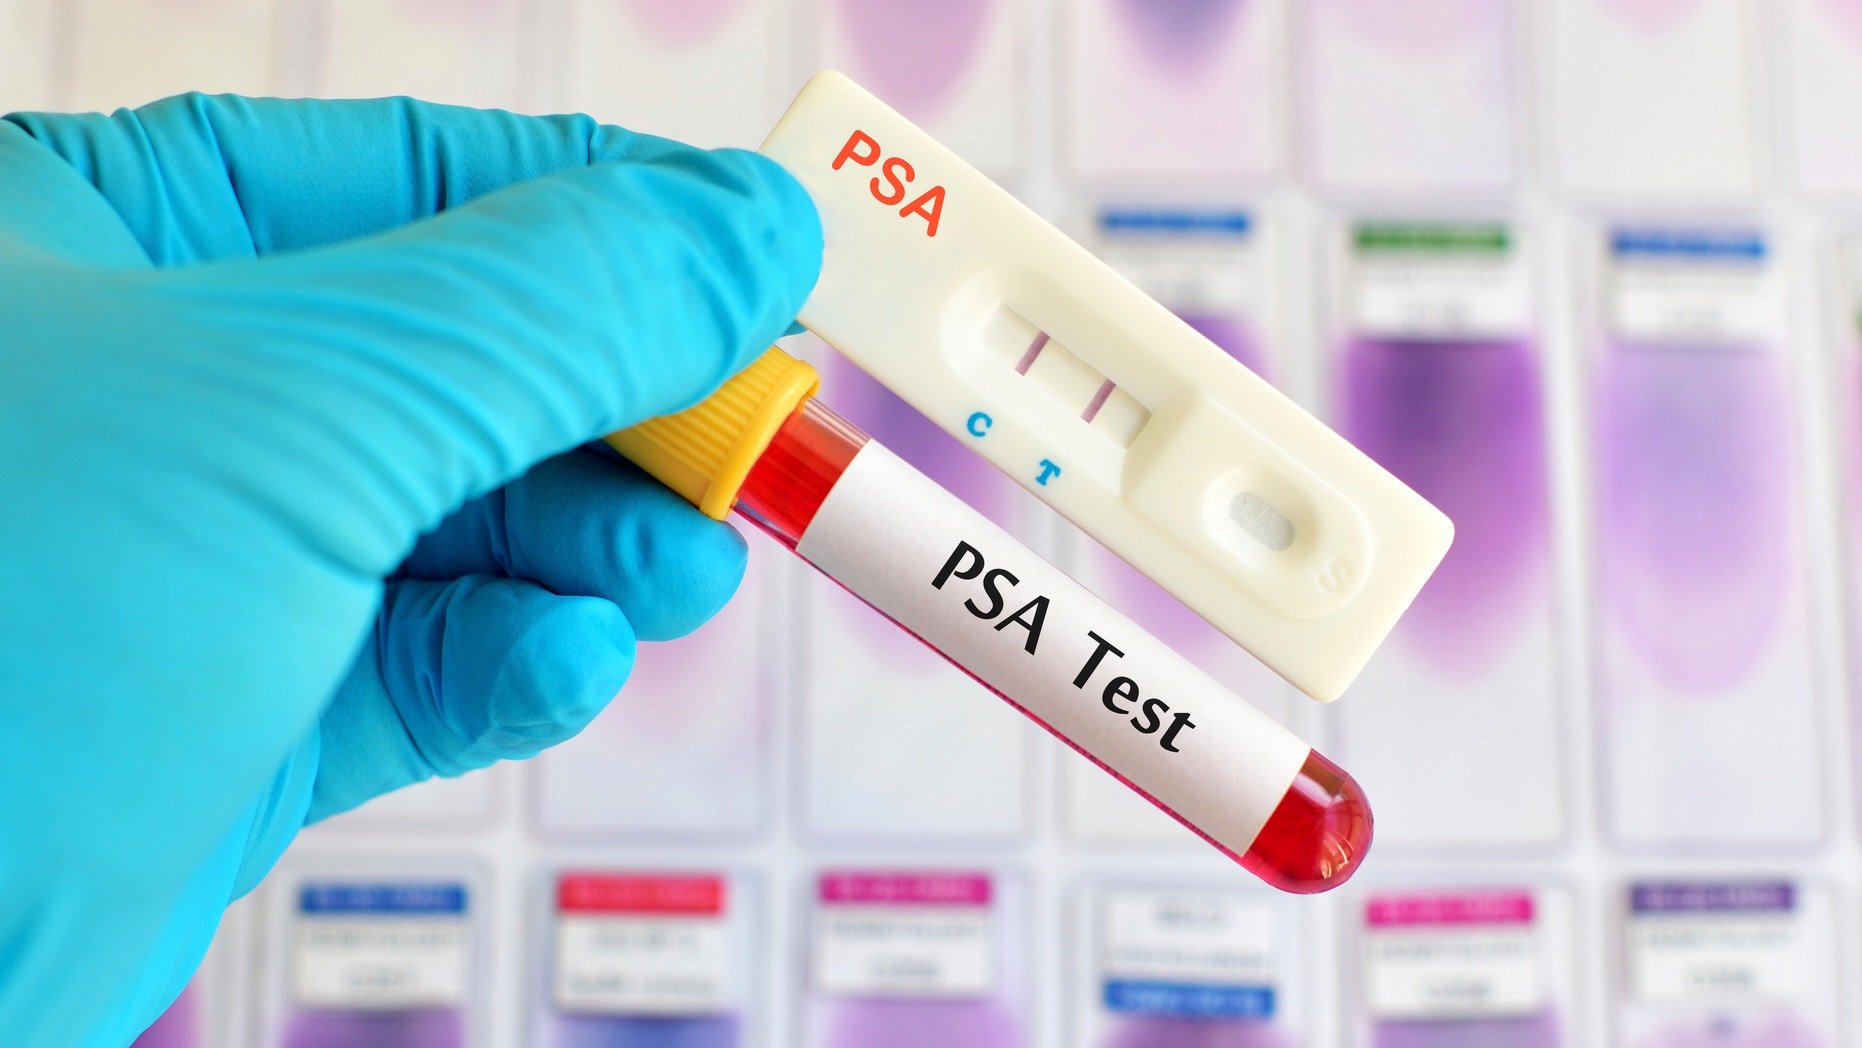 Prostate cancer tests are now OK with panel, with caveats ...